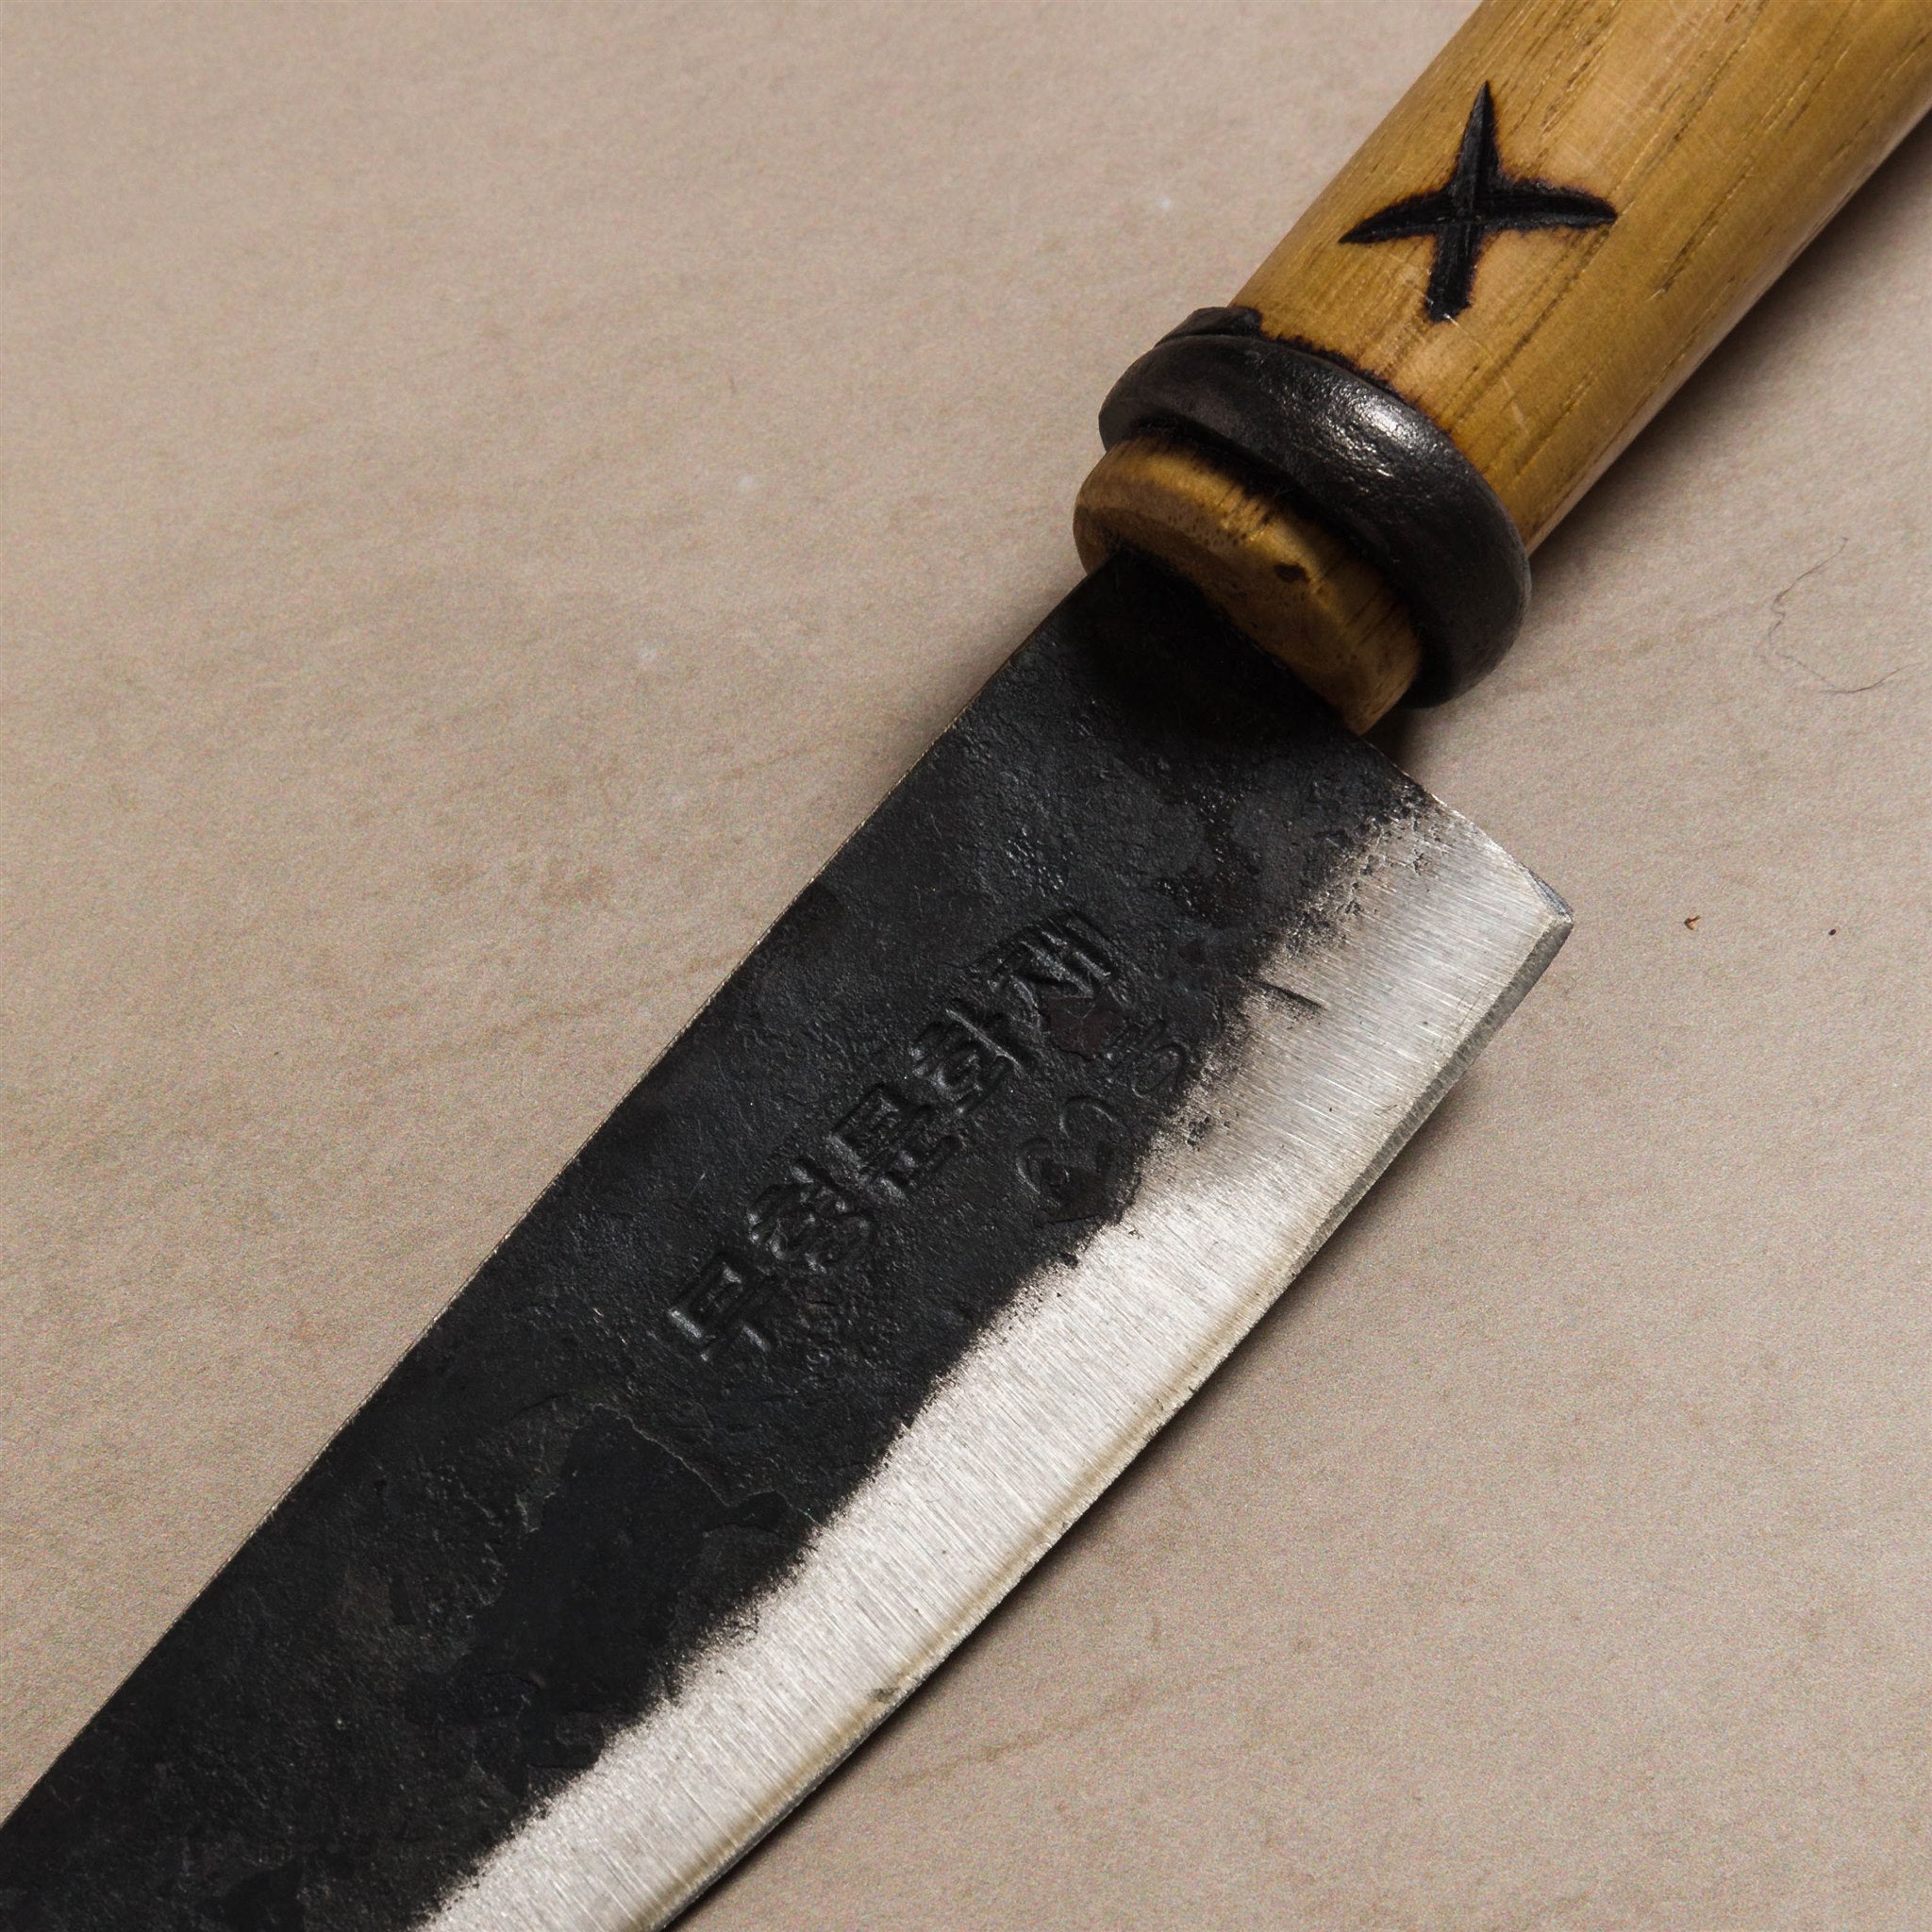 AMEICO - Official US Distributor of Master Shin's Anvil - Large Chef's Knife